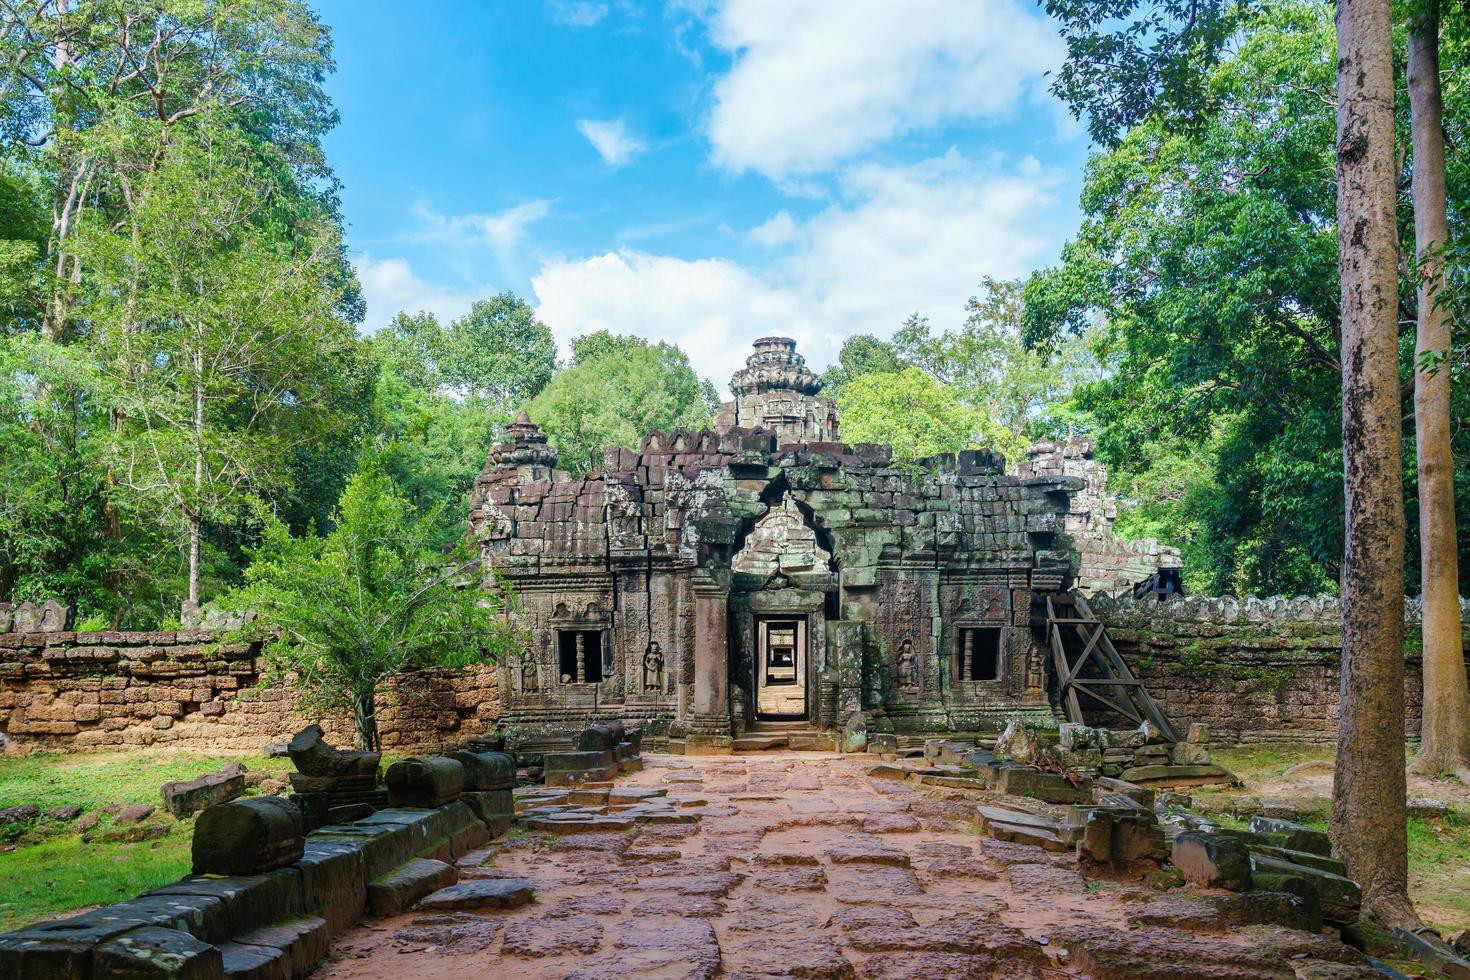 Banteay Kdei entrance in the Angkor Wat temple complex, Siem Reap, Cambodia photo